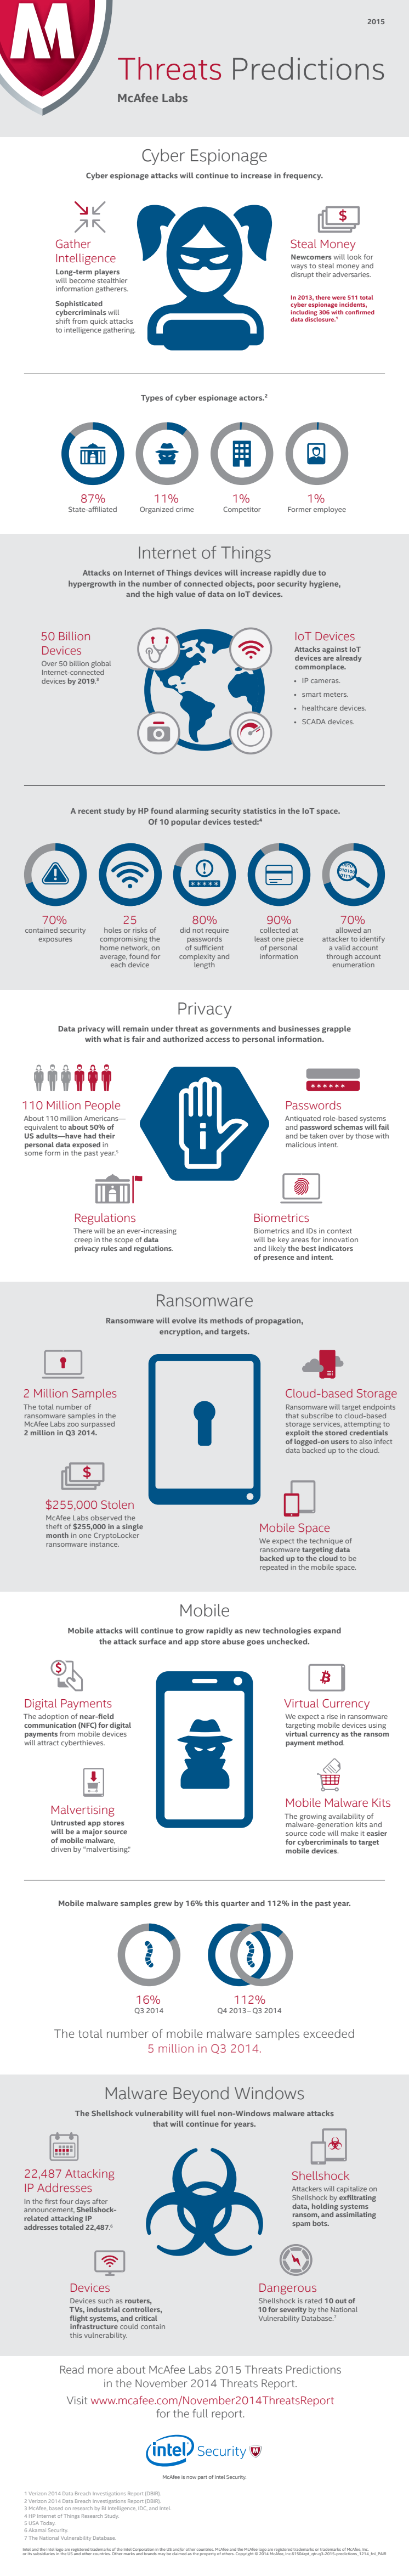 [McAfee/Intel Security] McAfee Labs™ Report Previews 2015 Developments in Exploits and Evasion